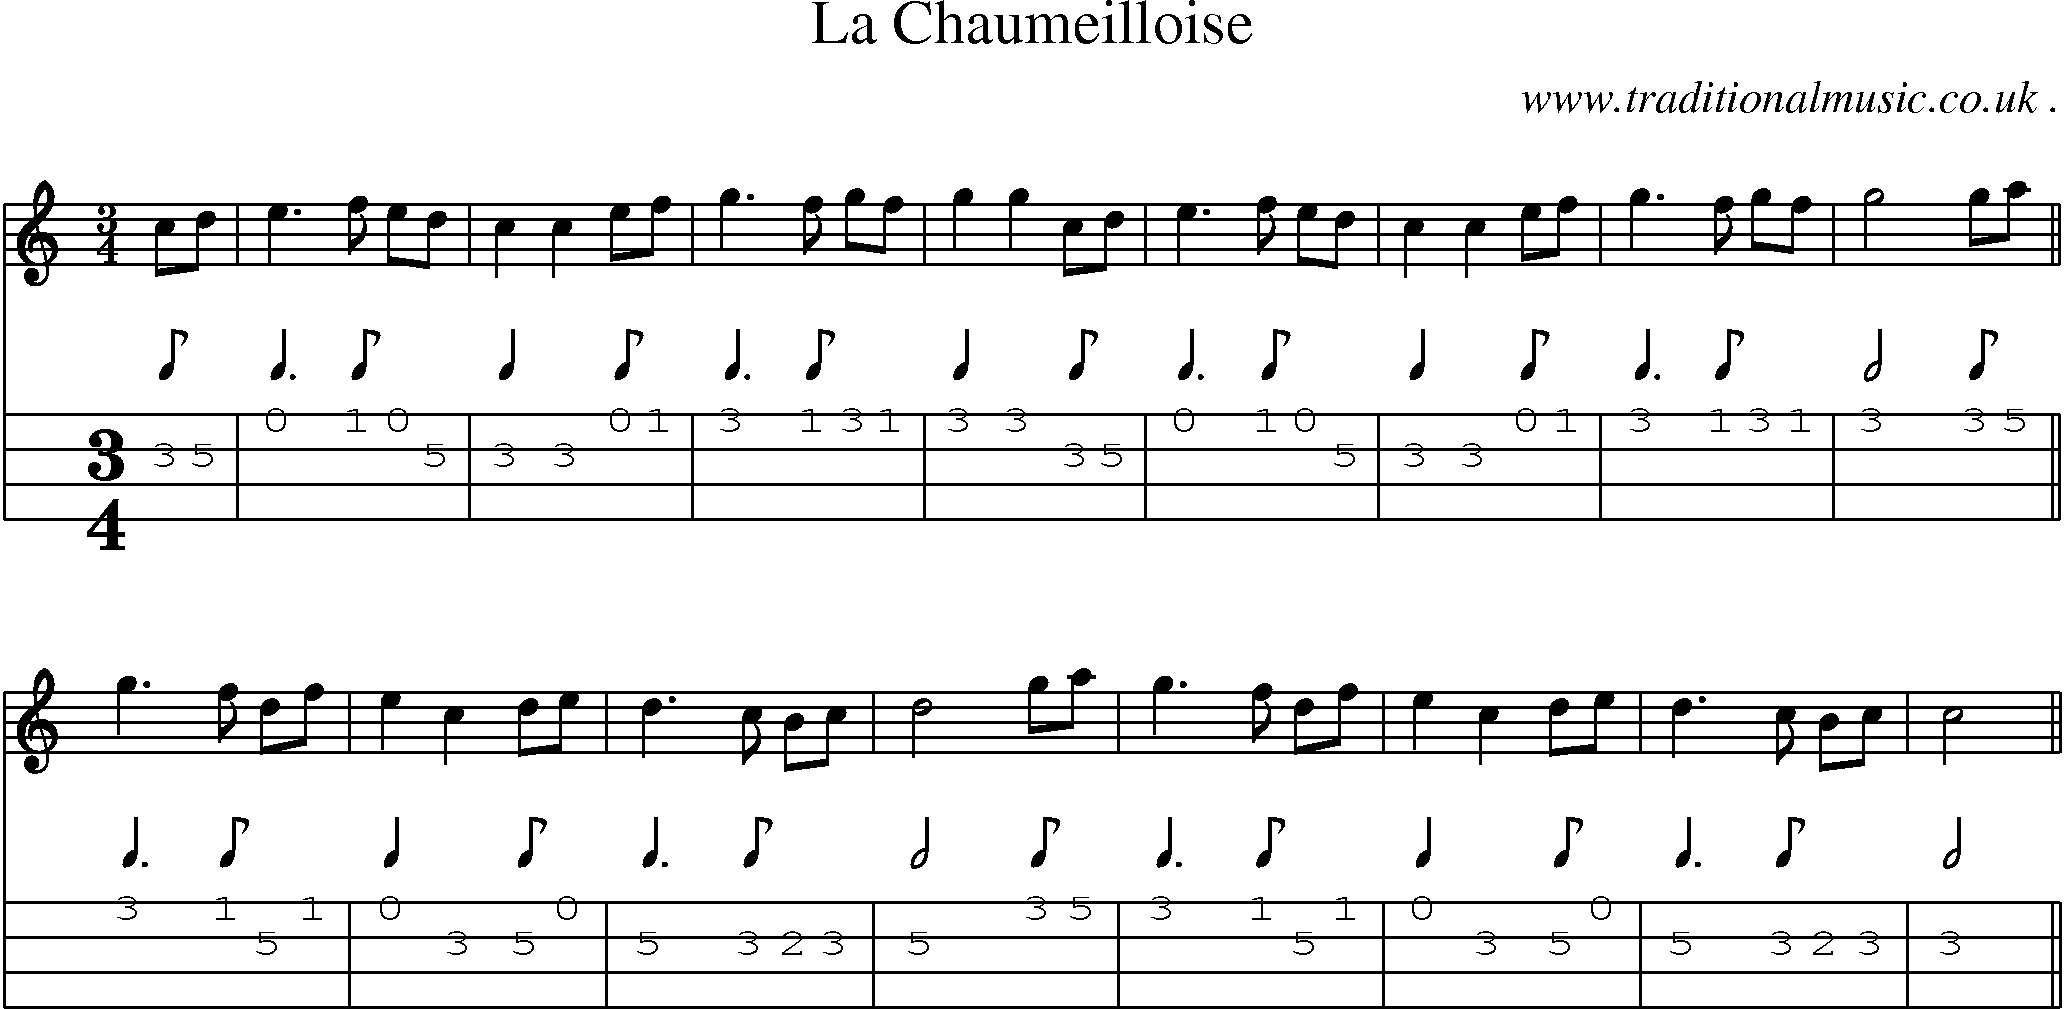 Sheet-Music and Mandolin Tabs for La Chaumeilloise